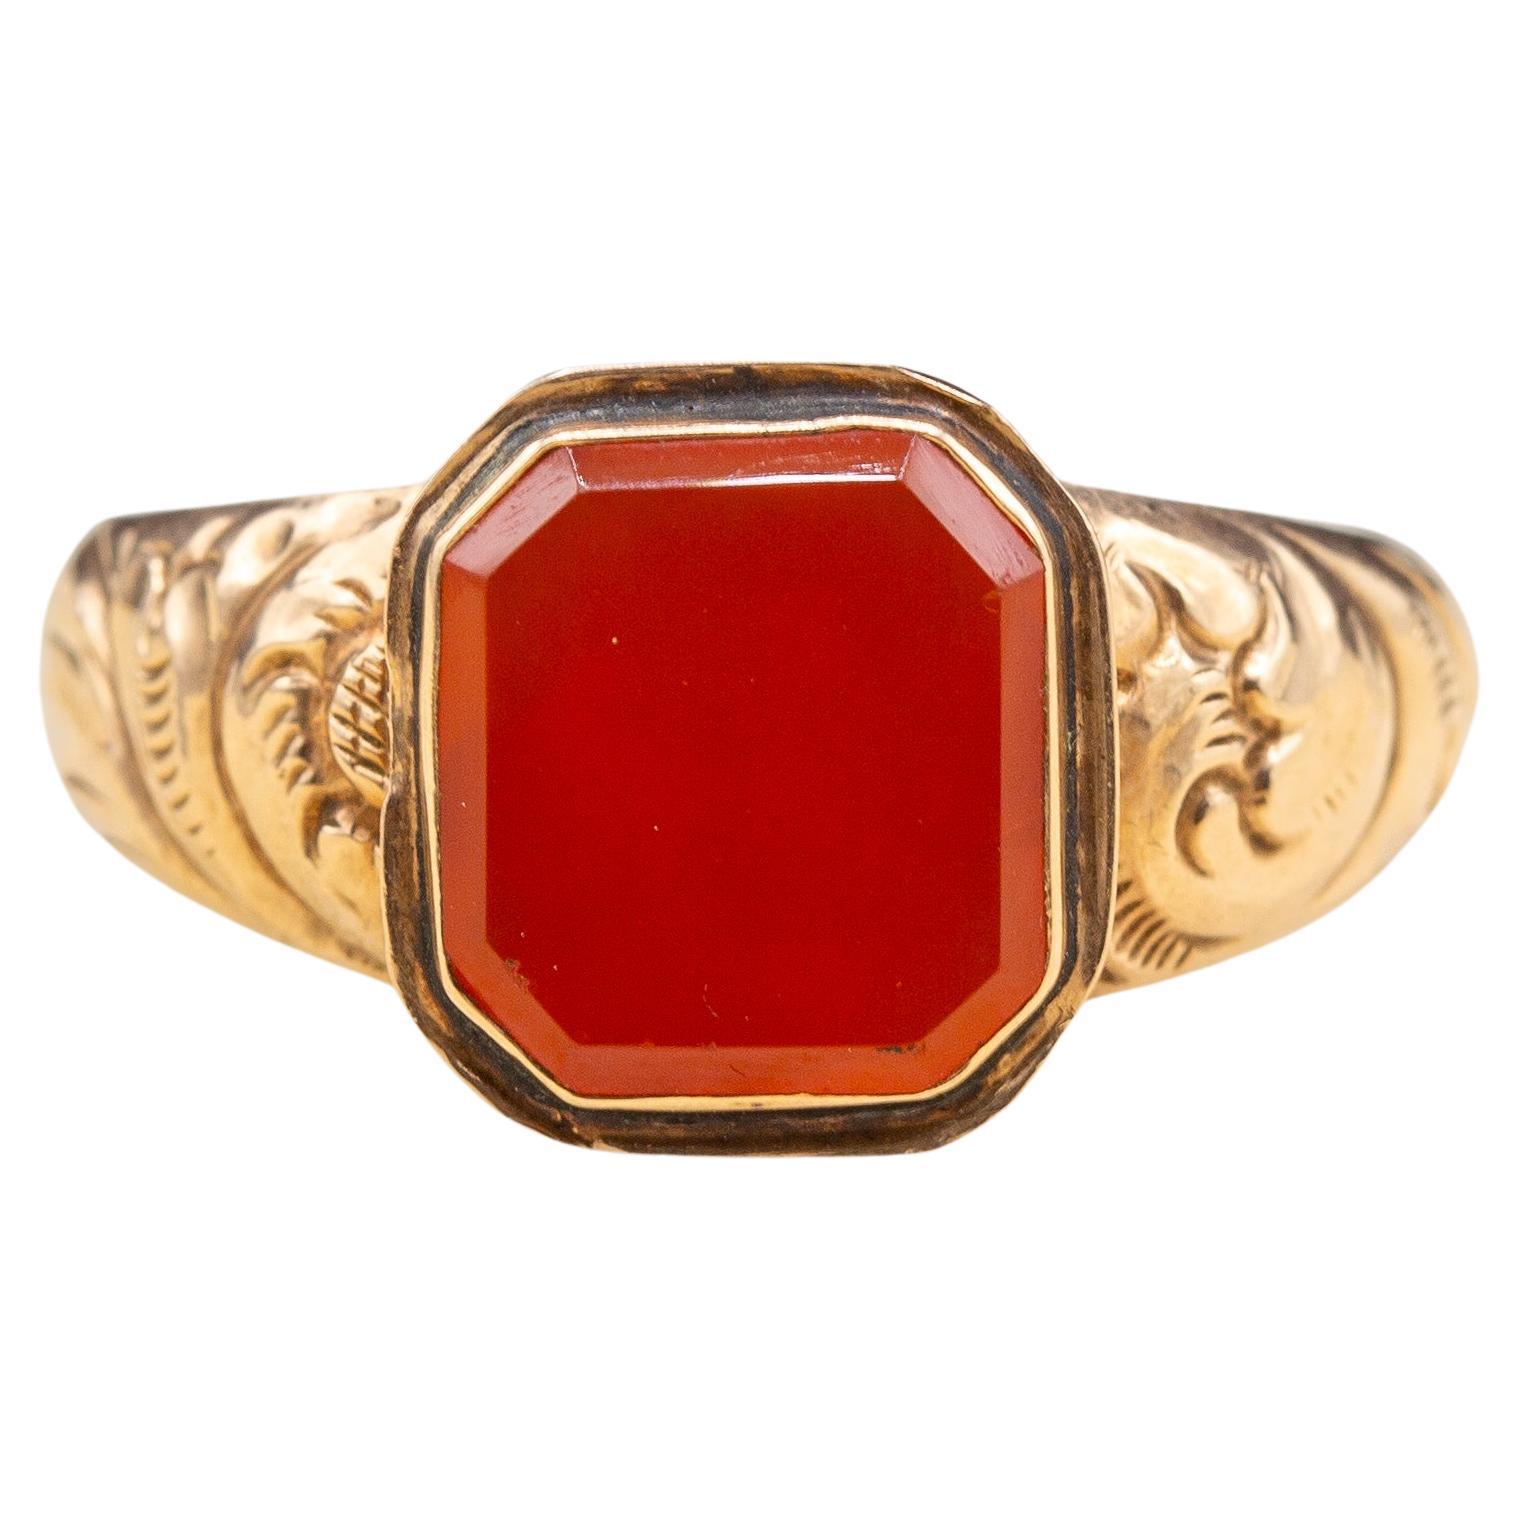 Georgian Gold and Carnelian Signet Ring Large 19th Century Antique Seal Ring 